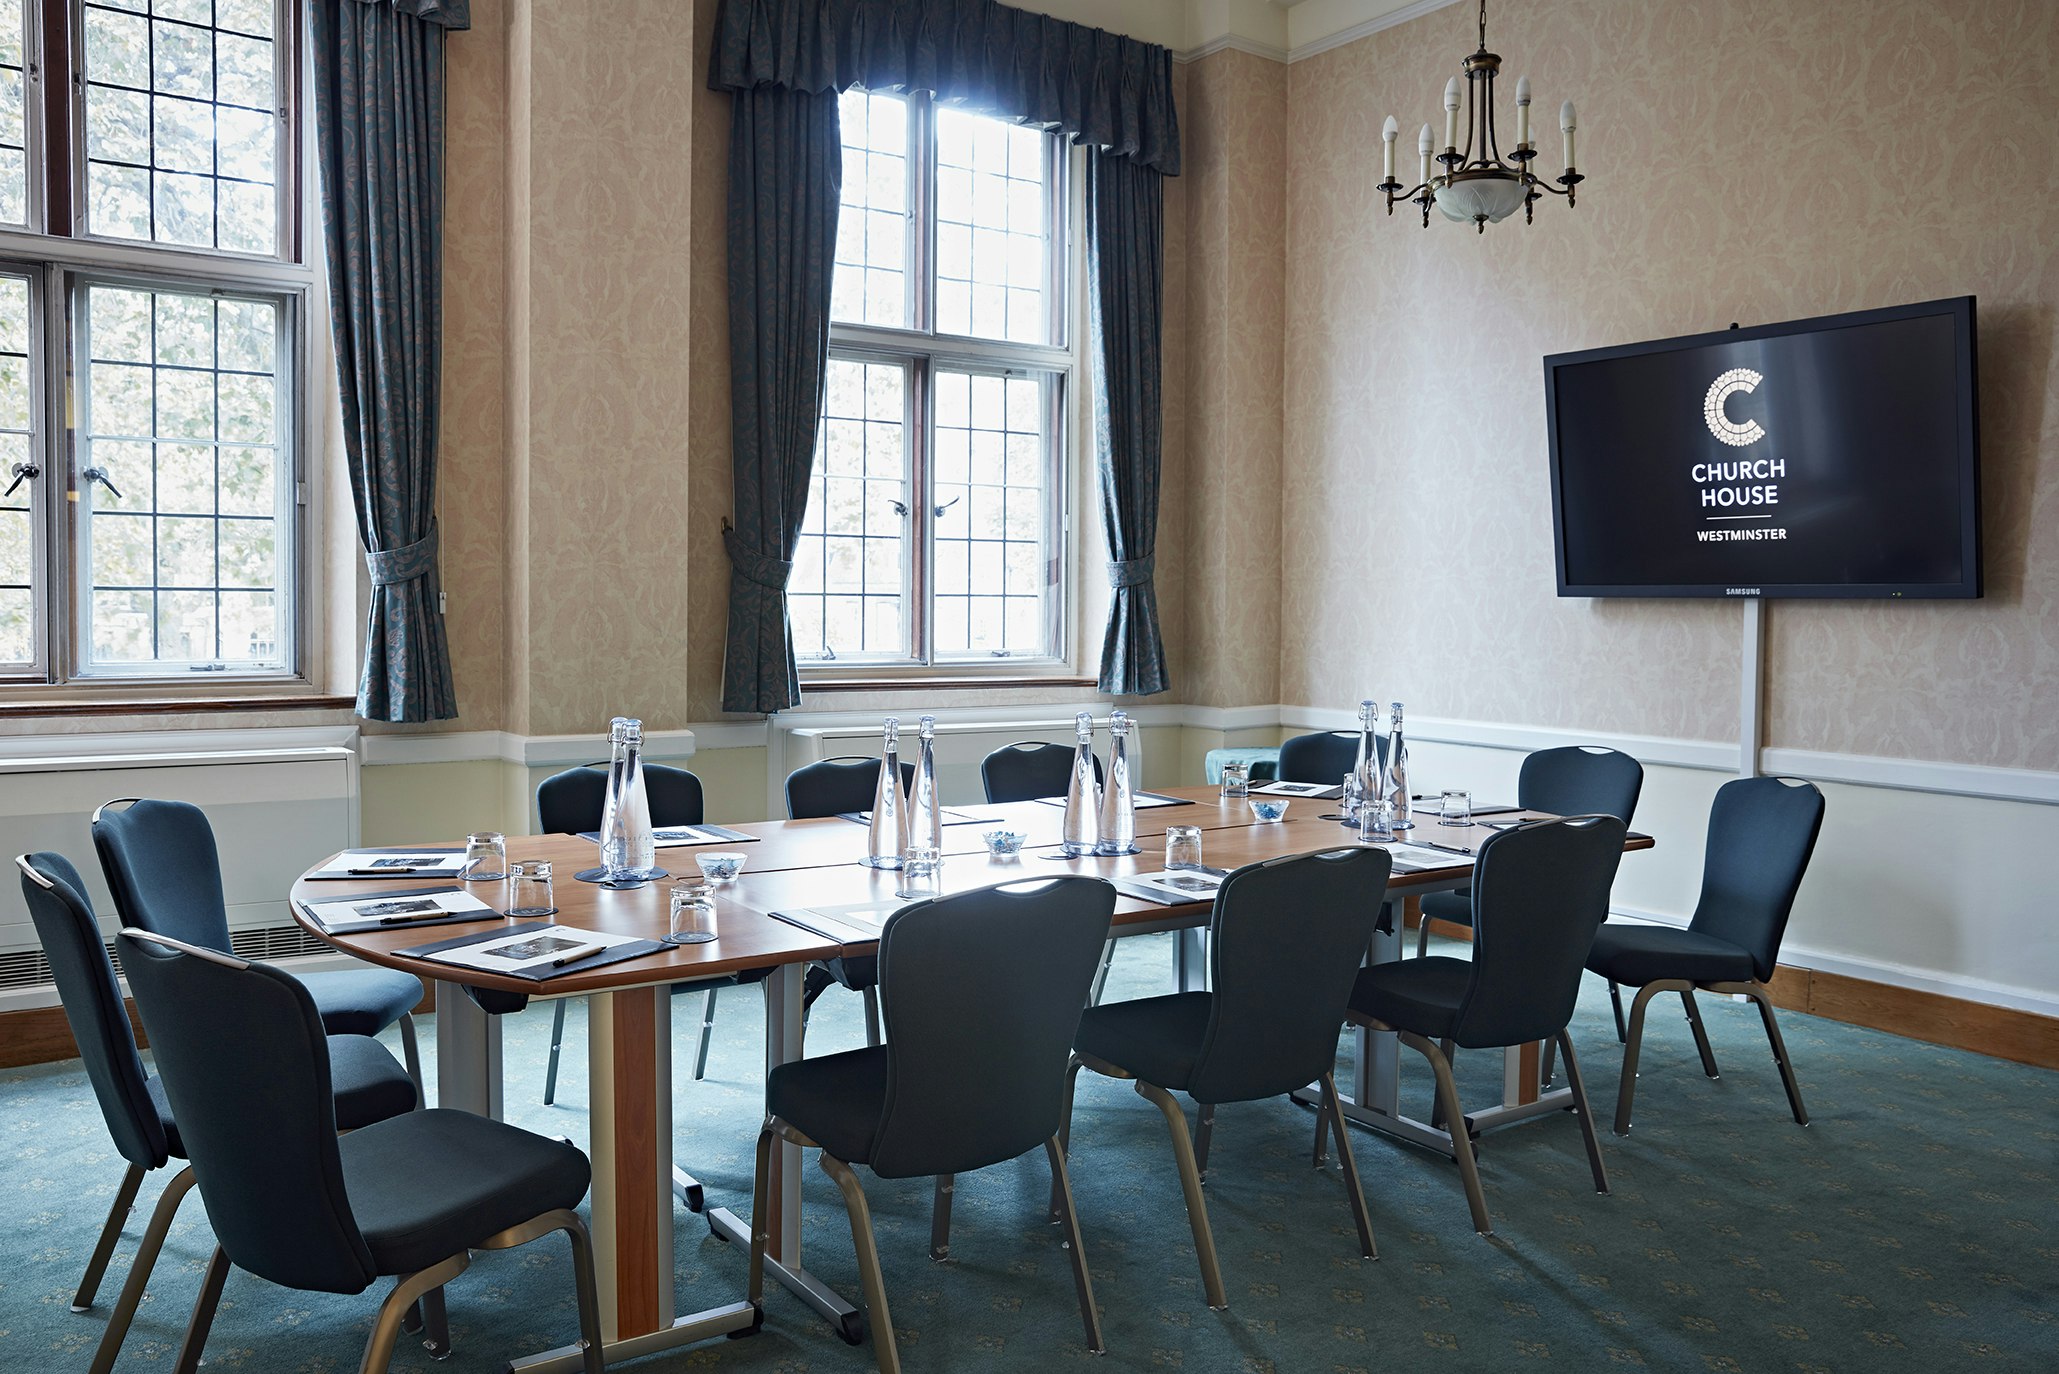 Church House Westminster - Charter Room image 3